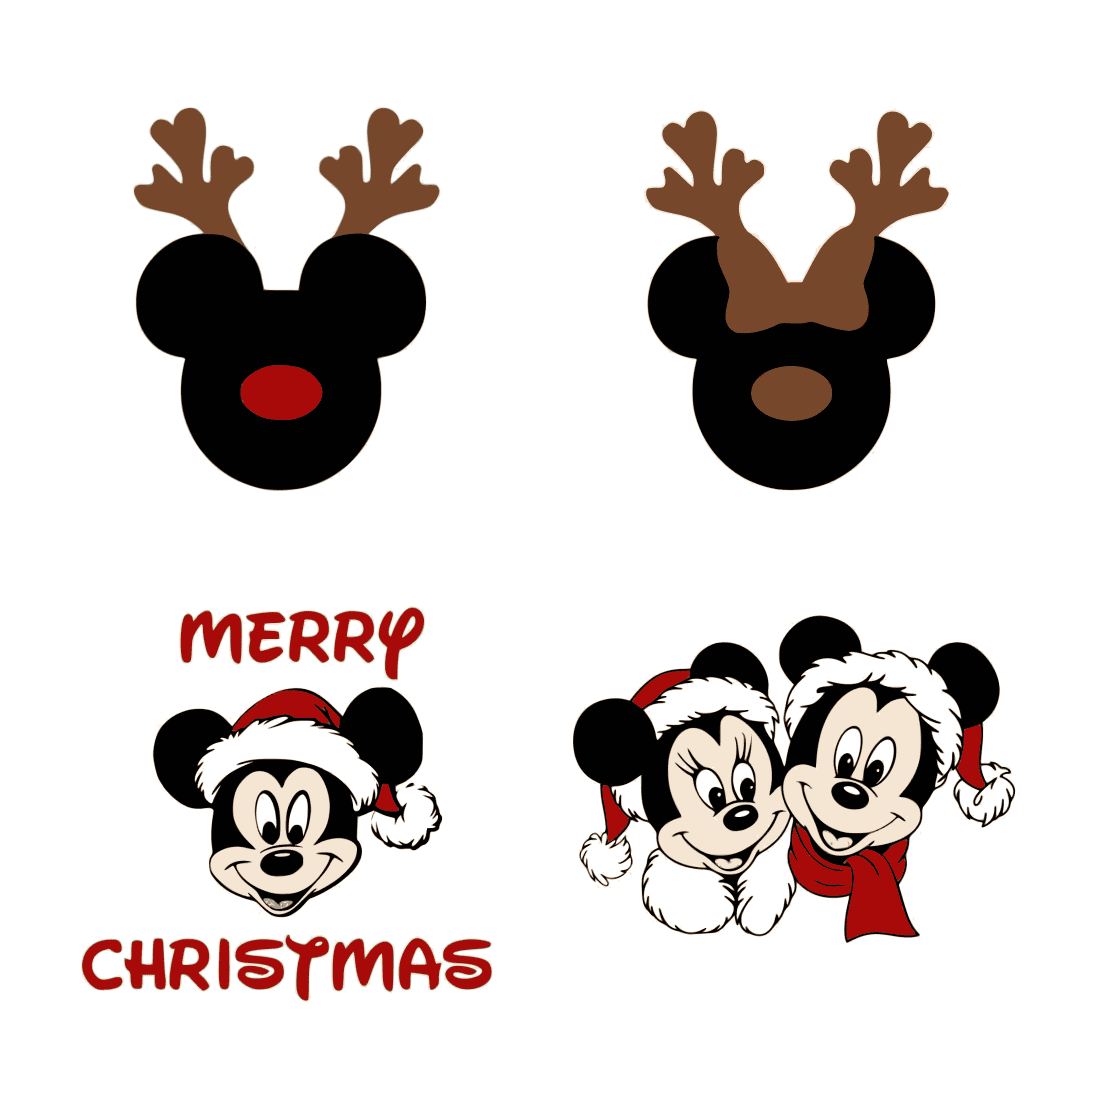 Pack of beautiful images of mickey mouse christmas.